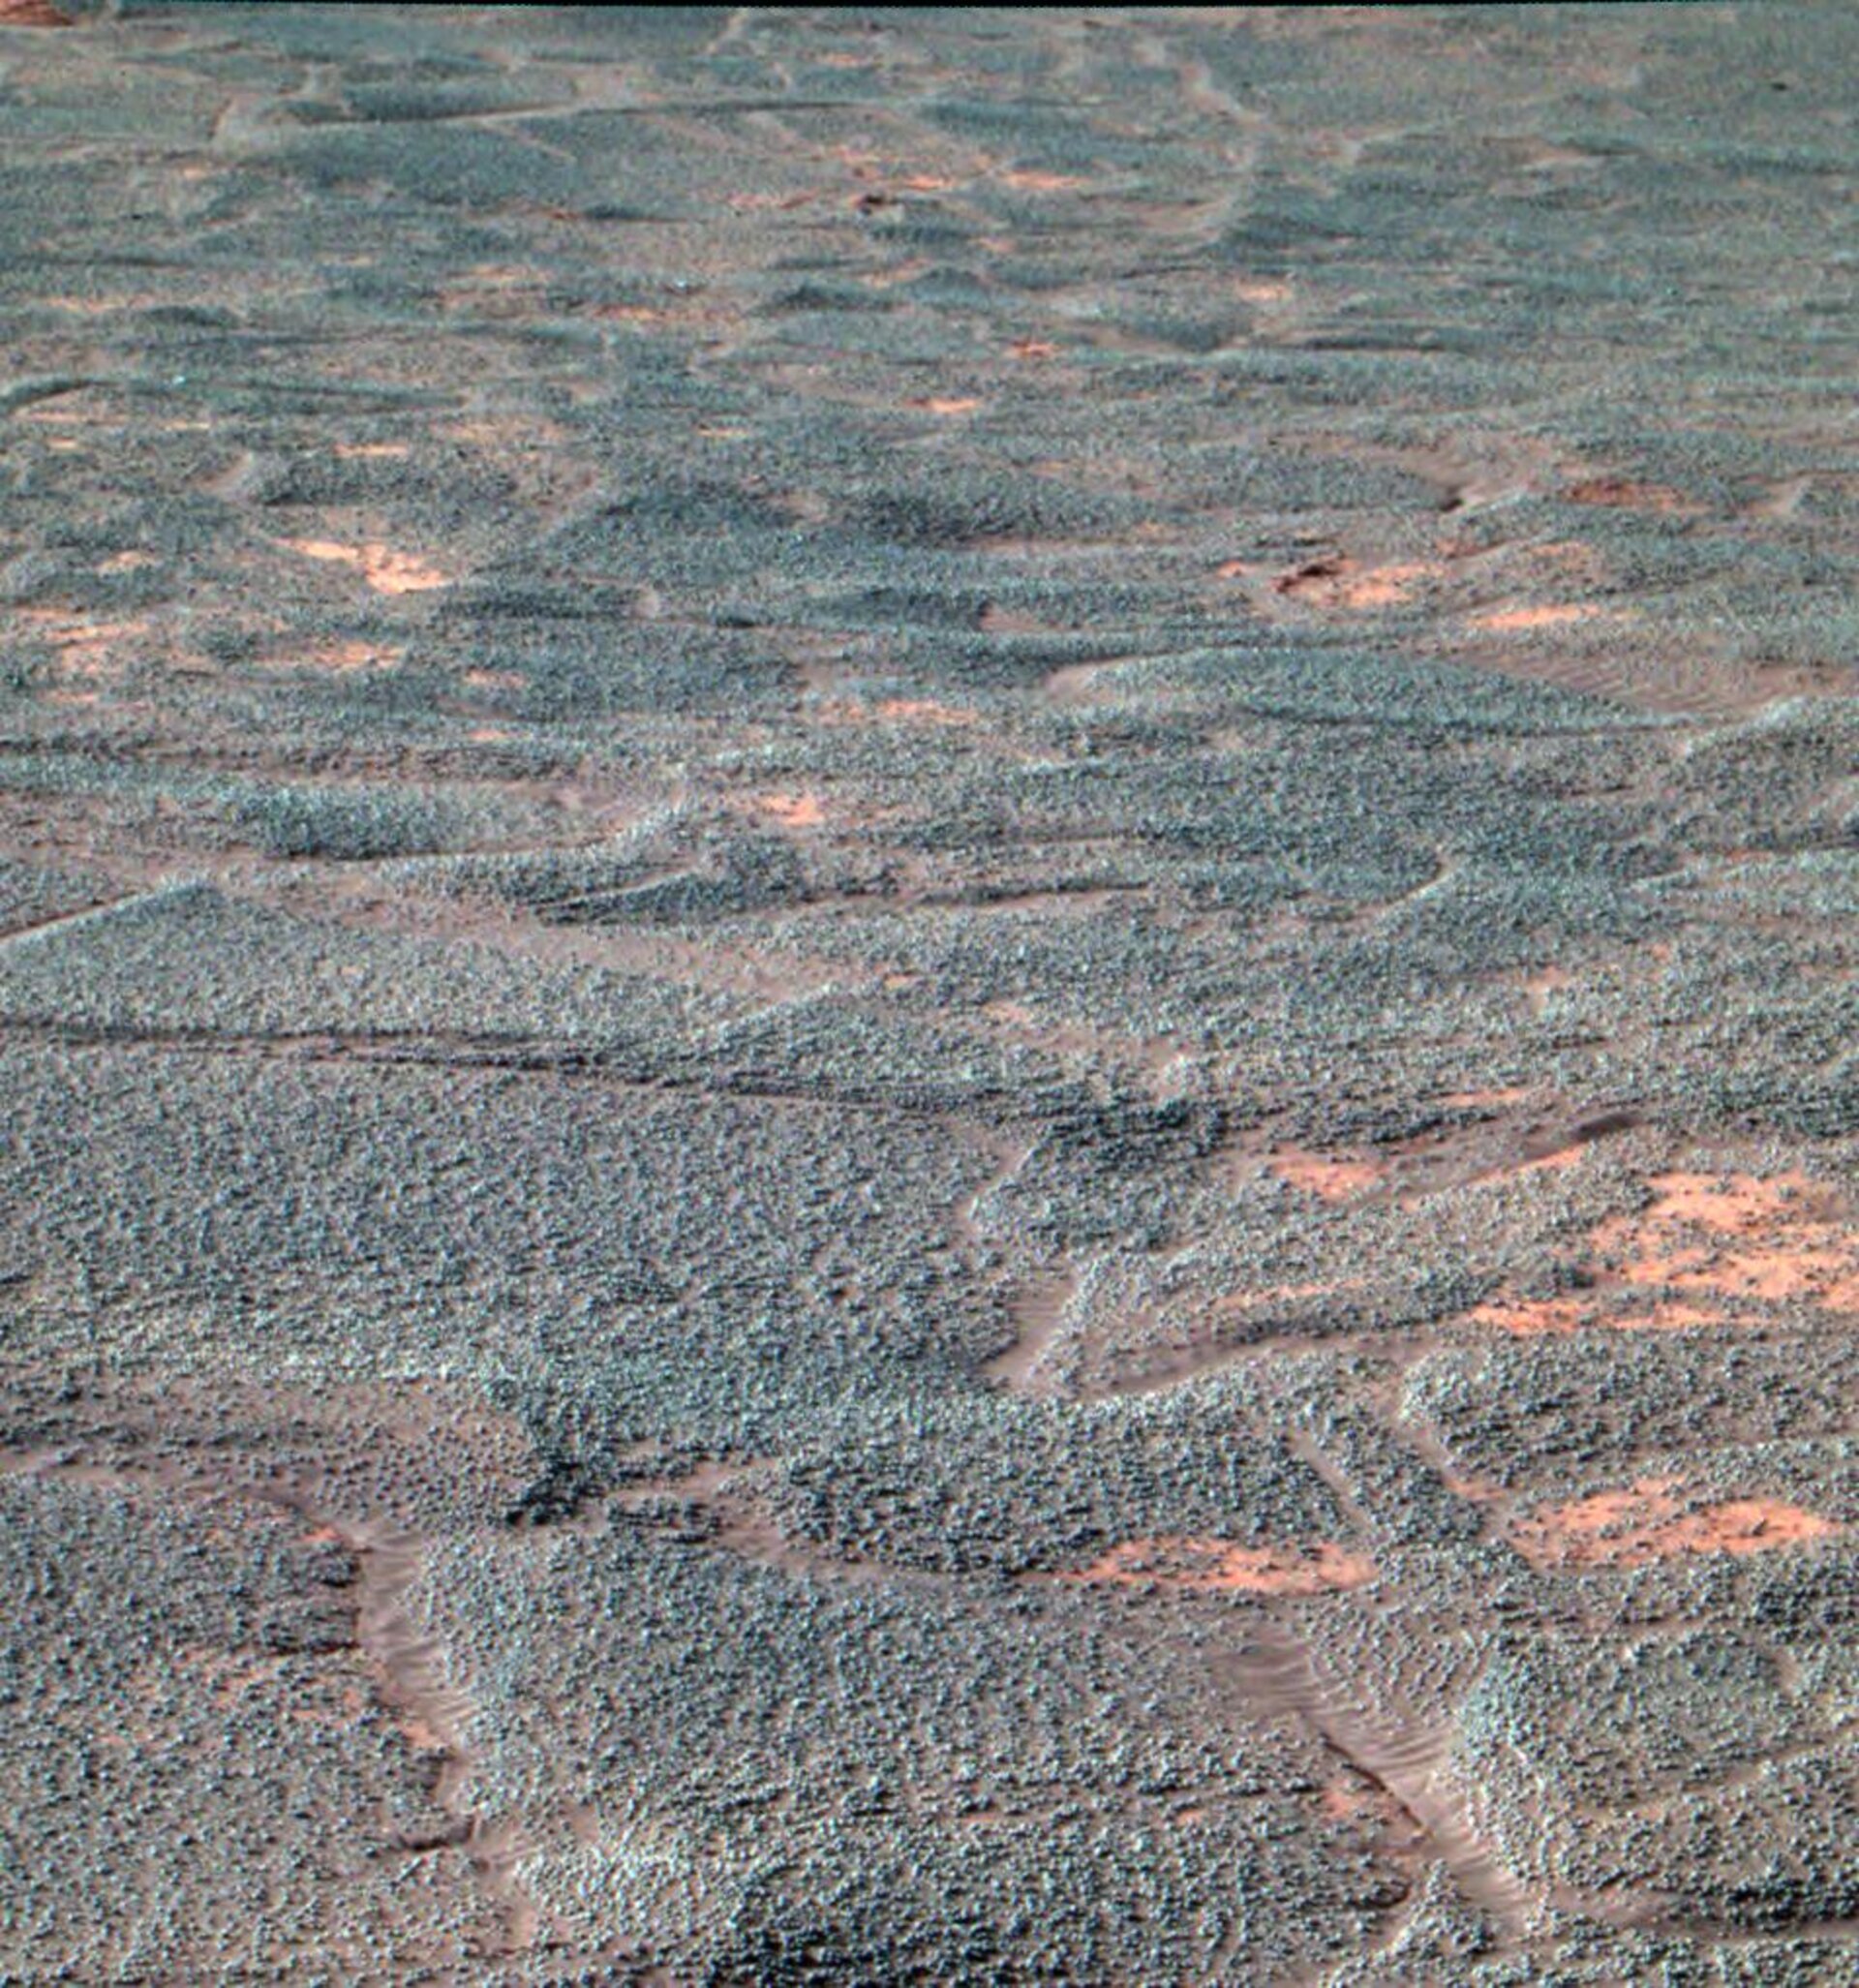 Crater interior from Opportunity via Mars Express